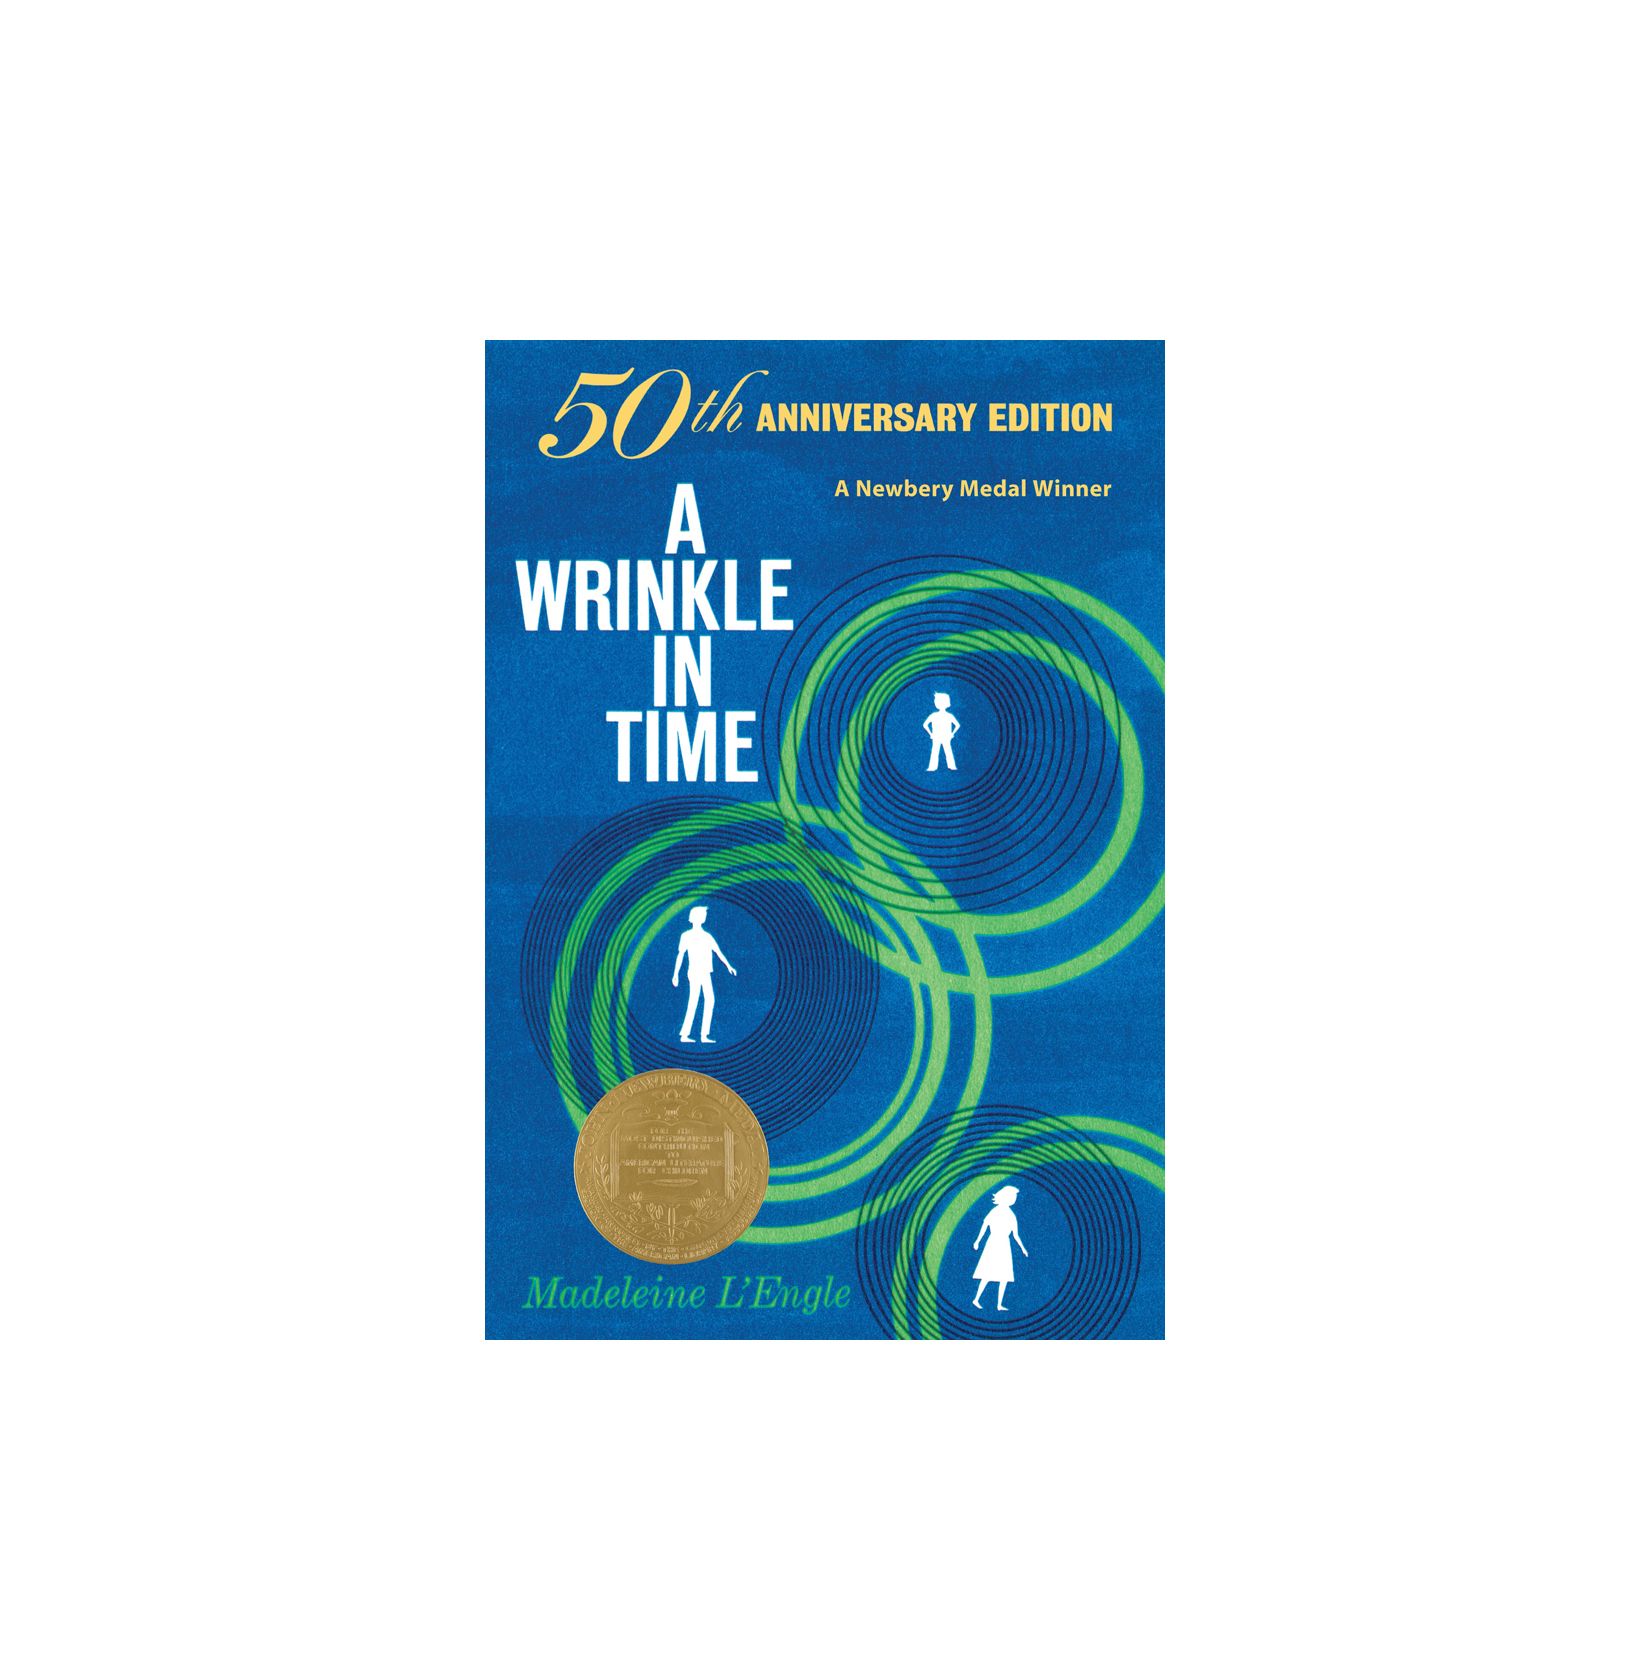 A Wrinkle in Time, de Madeleine L’Engle